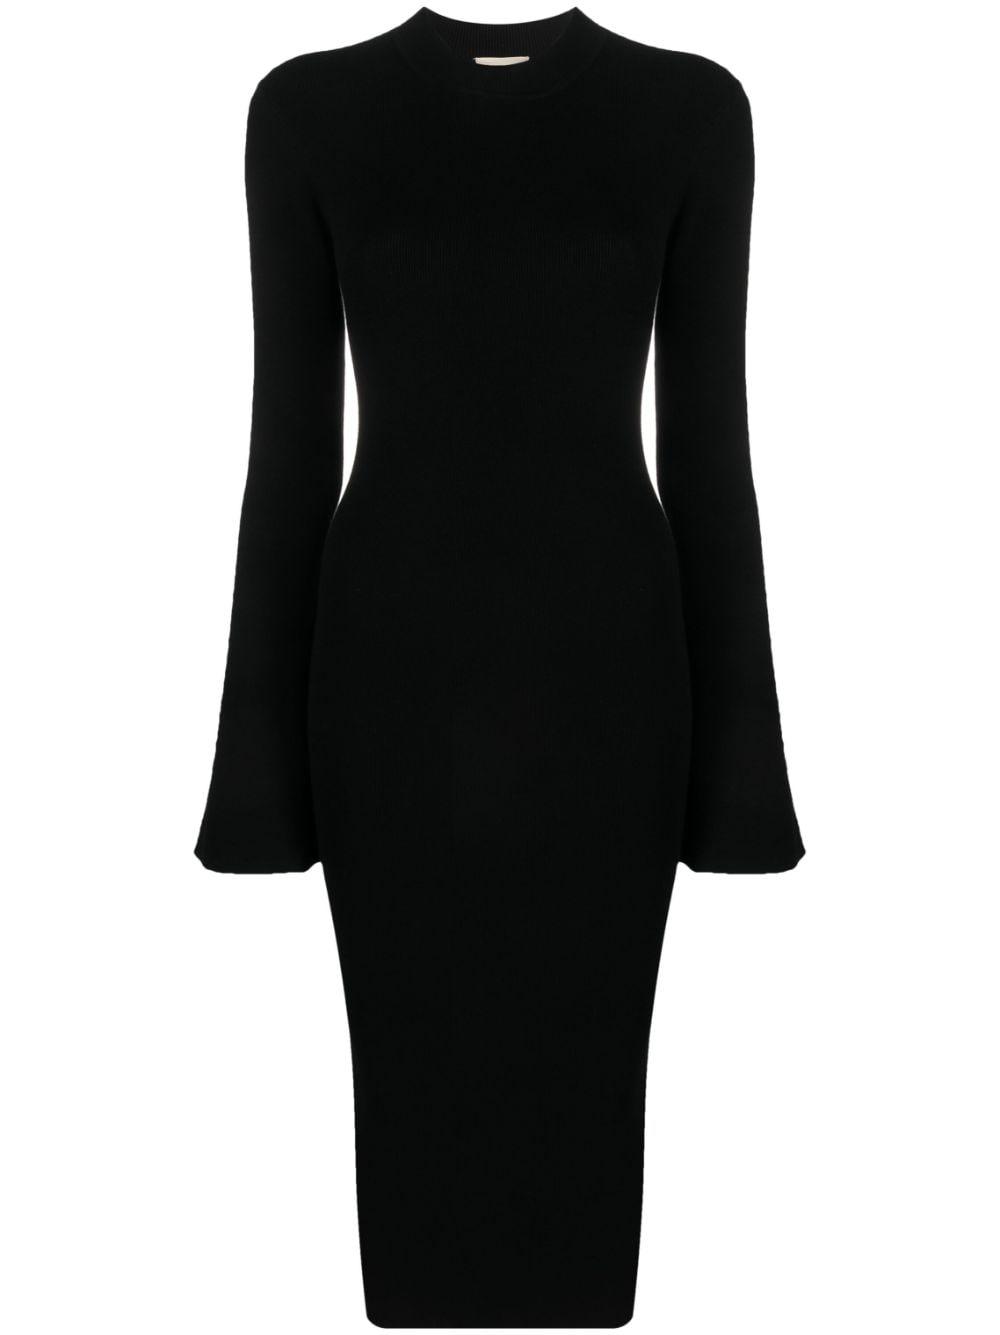 THE GARMENT Marmont Open-back Knitted Dress in Black | Lyst